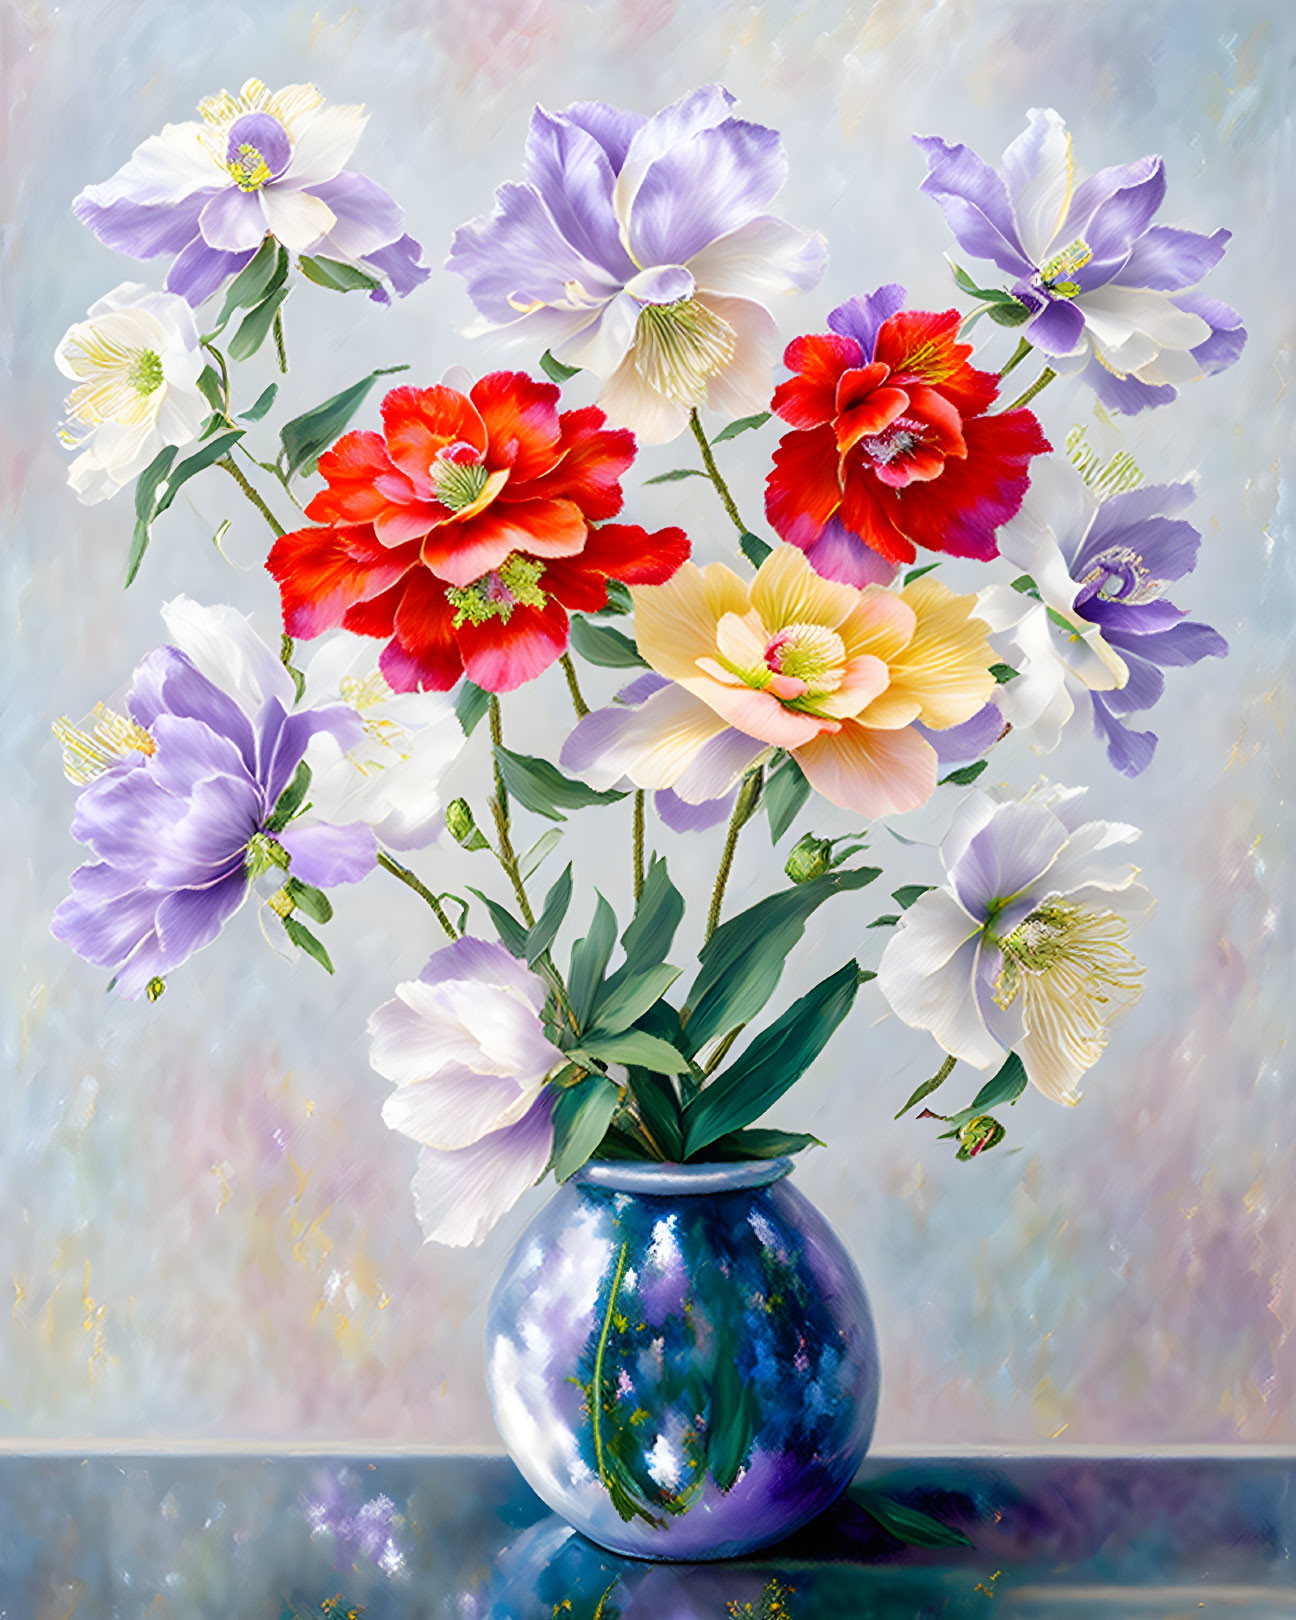 Colorful bouquet of poppies and flowers in blue vase on soft background